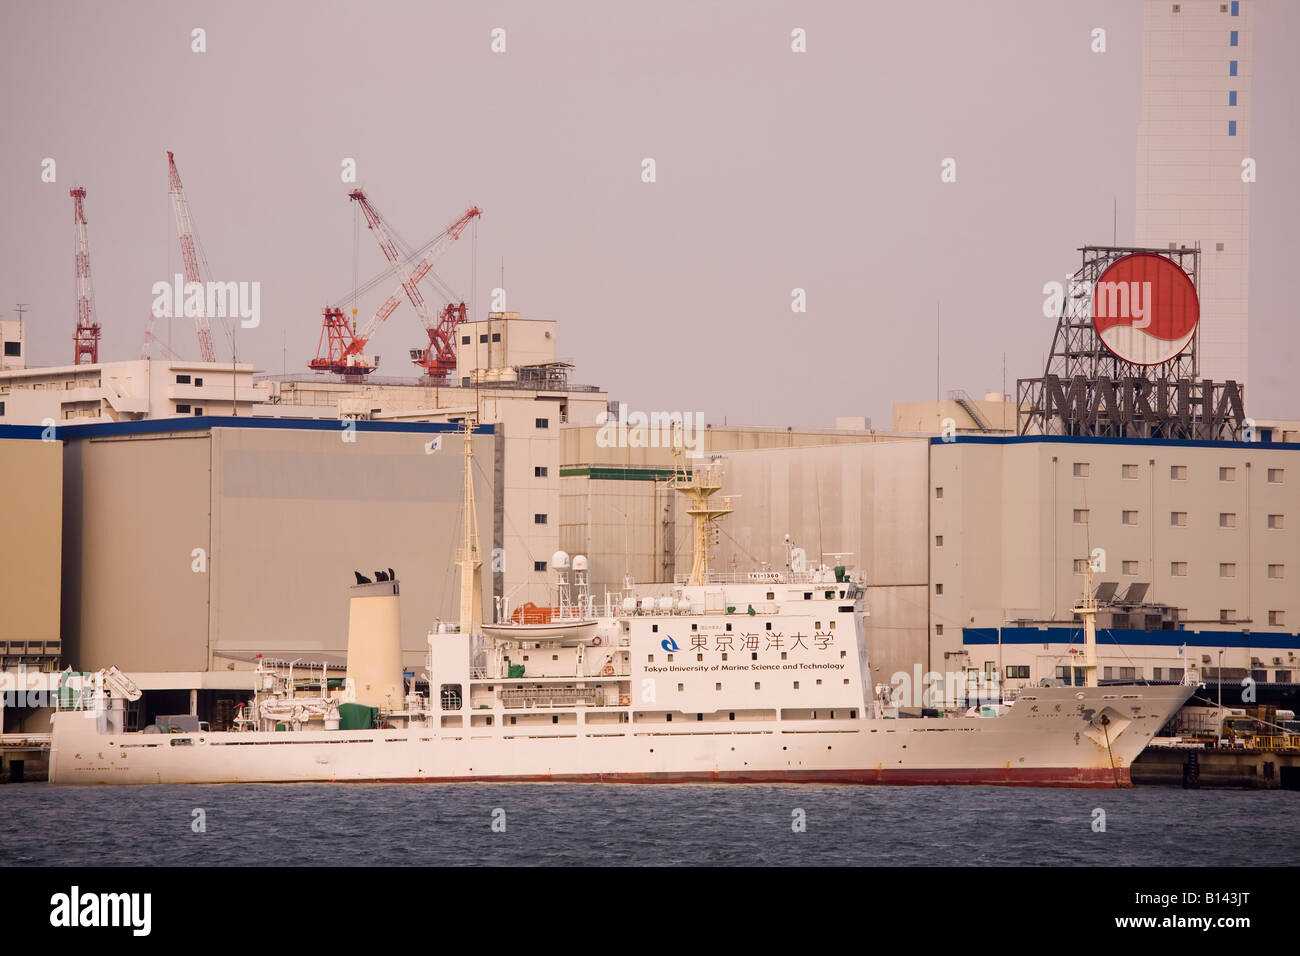 A research vessel of the Tokyo University of marine science and technology is docked in Tokyo Bay, Japan. Stock Photo